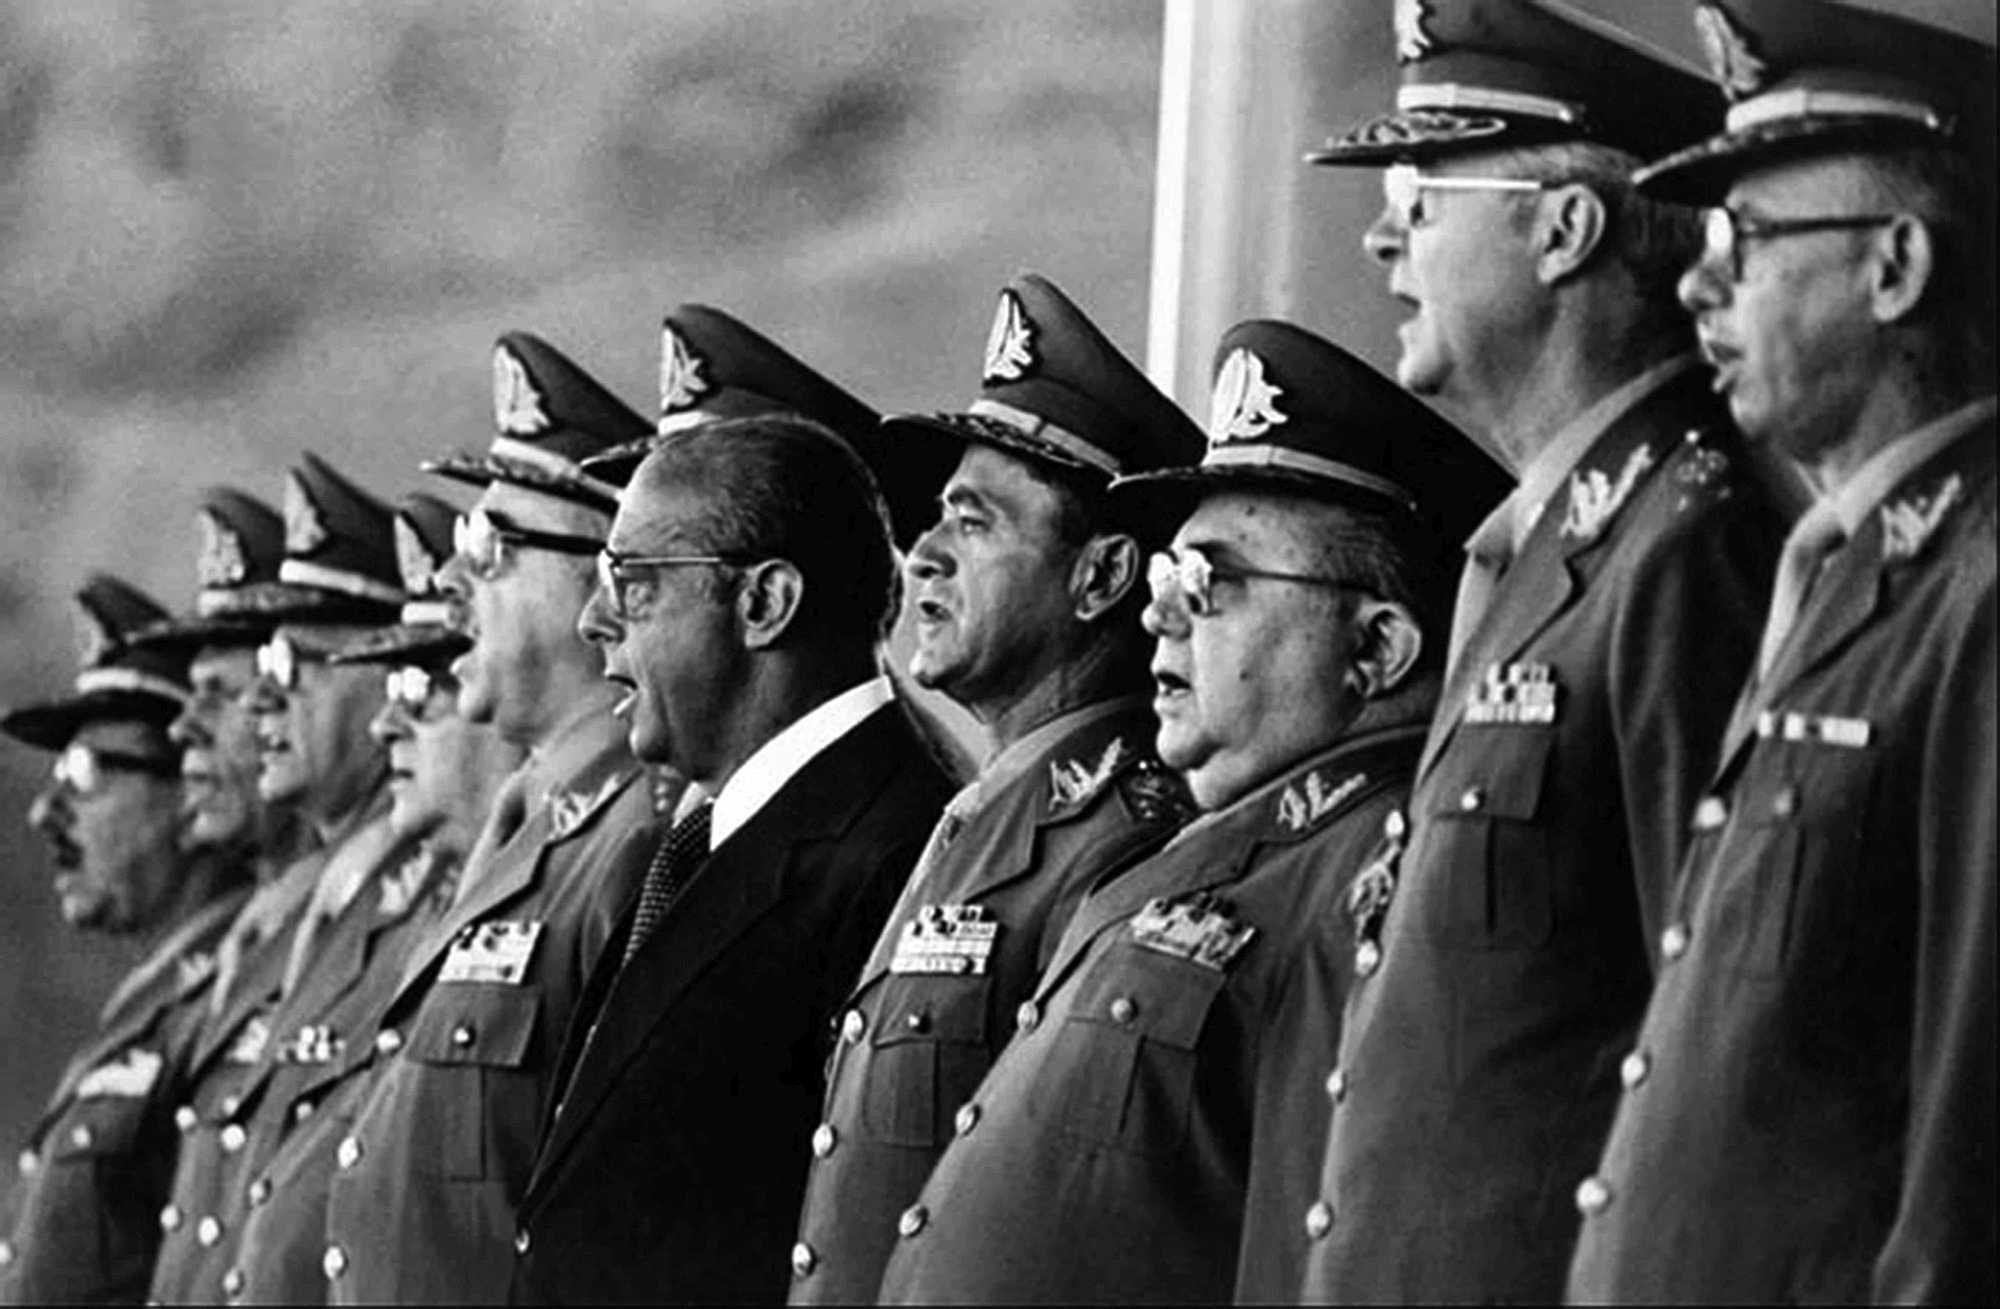 President Figueiredo, a general, surrounded by military men